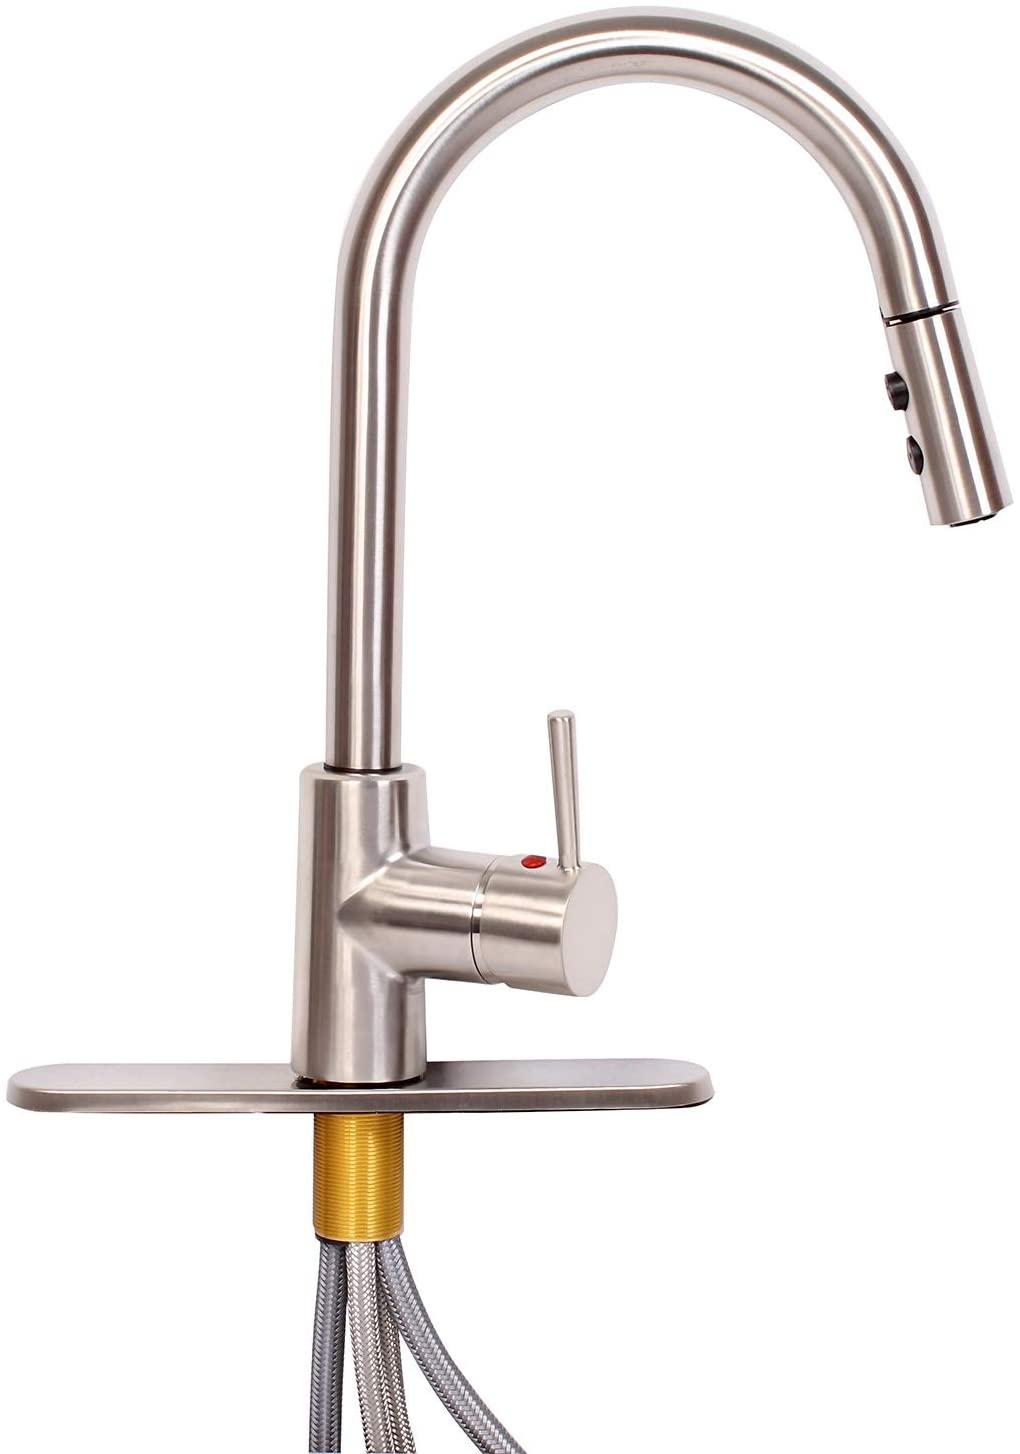 These RV Kitchen Faucets Are A Stylish Upgrade To Your Camper’s Hardware 